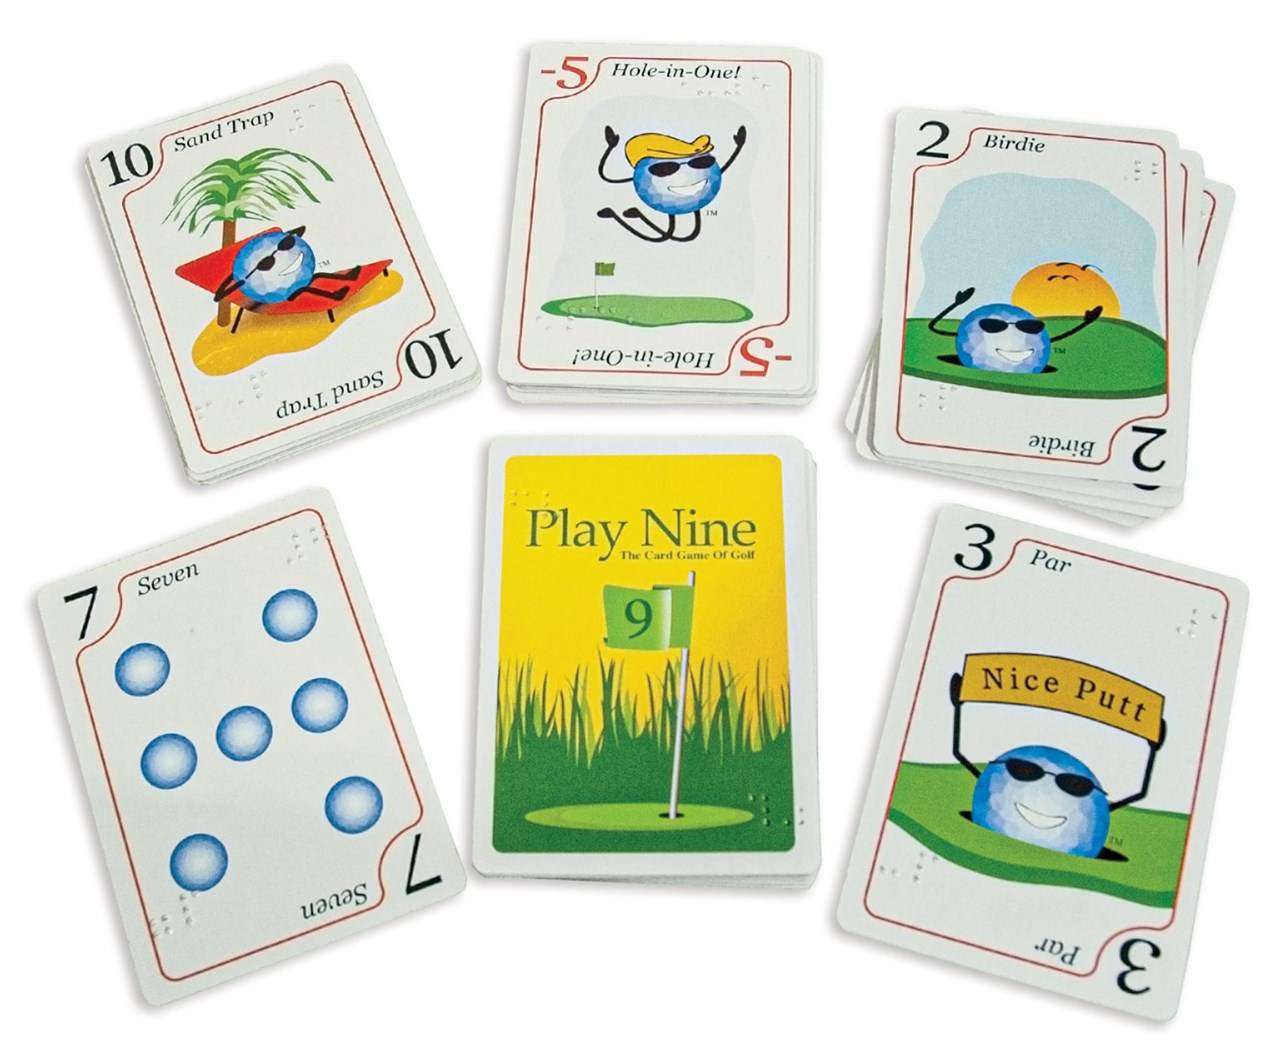 Play Nine The Card Game Of Golf 2-6 Players Strategy Card Game Ages 8+  SEALED